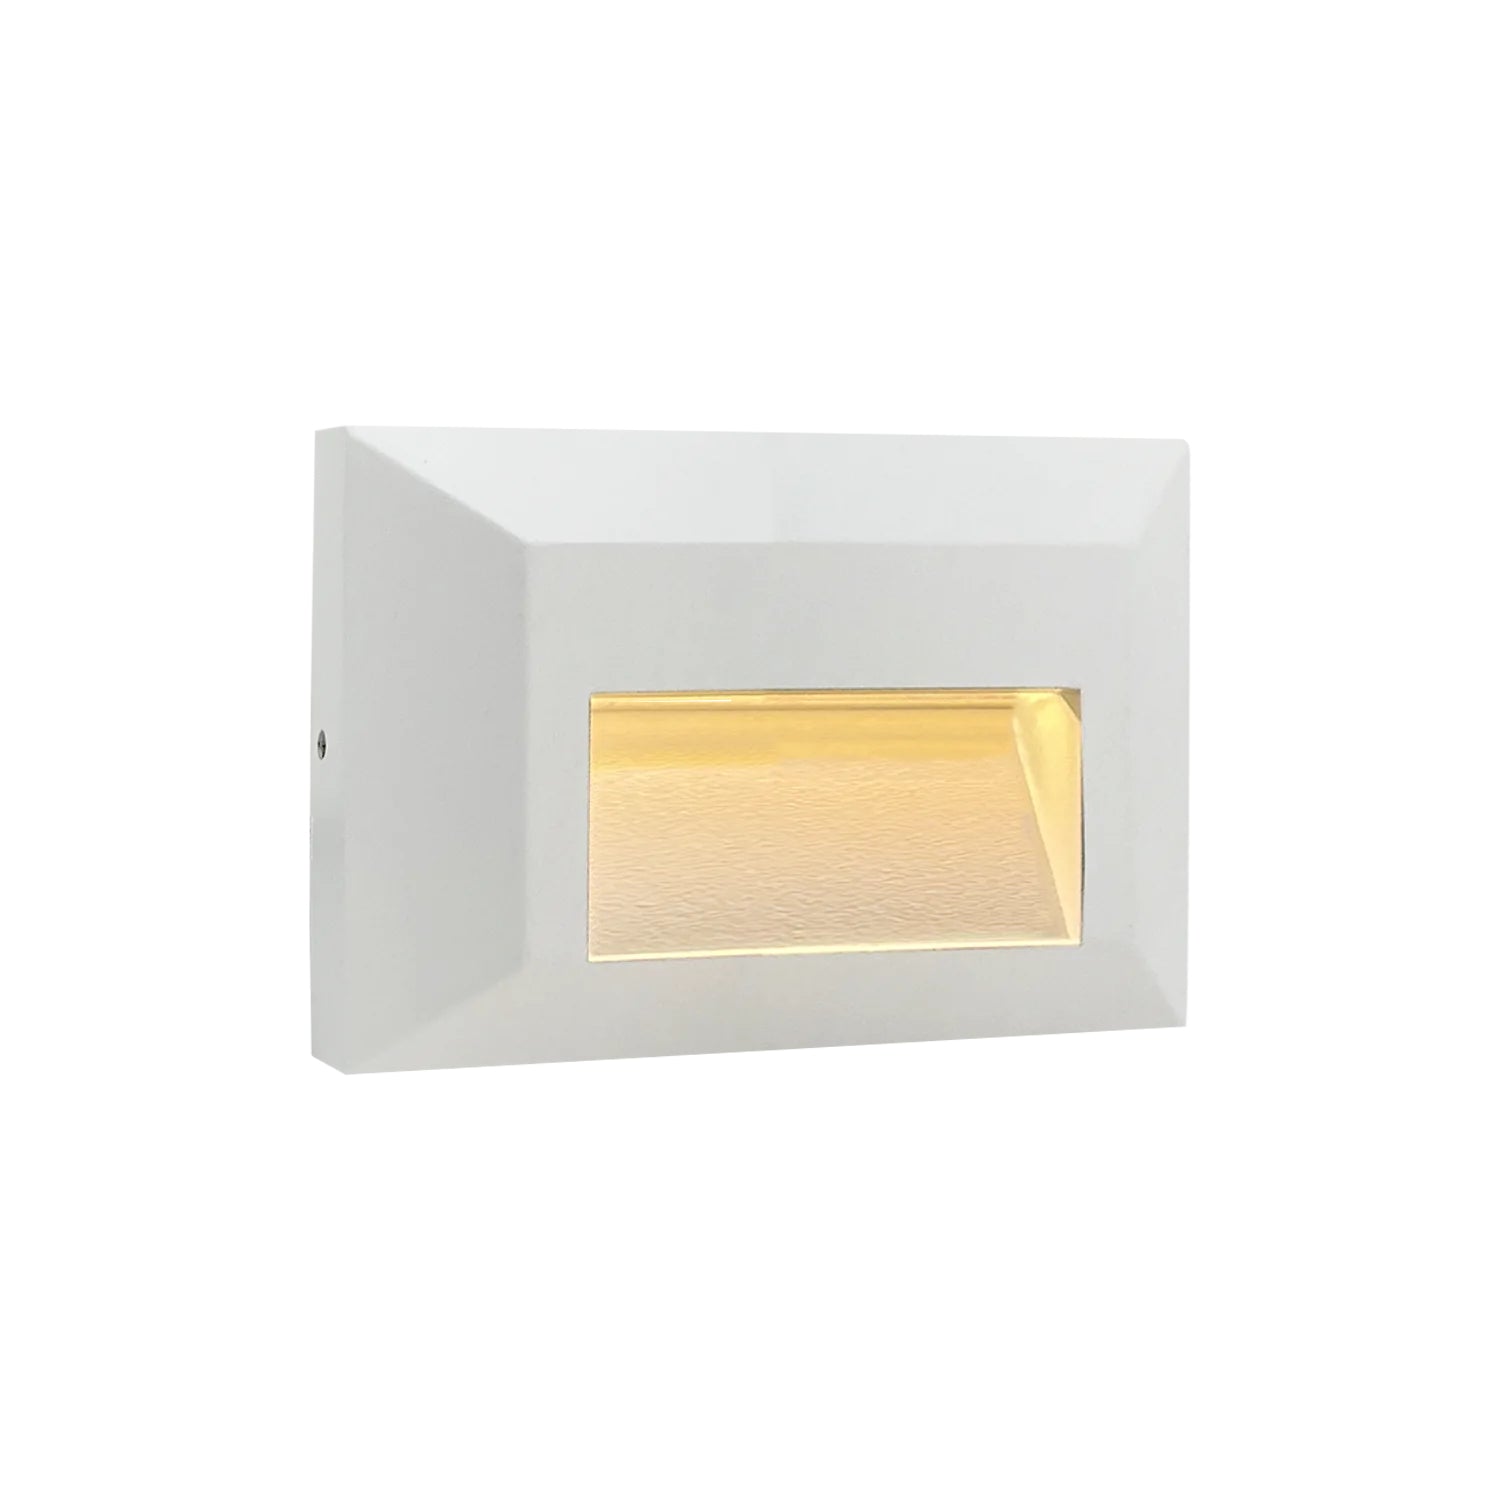 STA03 3W Low Voltage Waterproof Square Recessed LED Step Light Wall Fixture